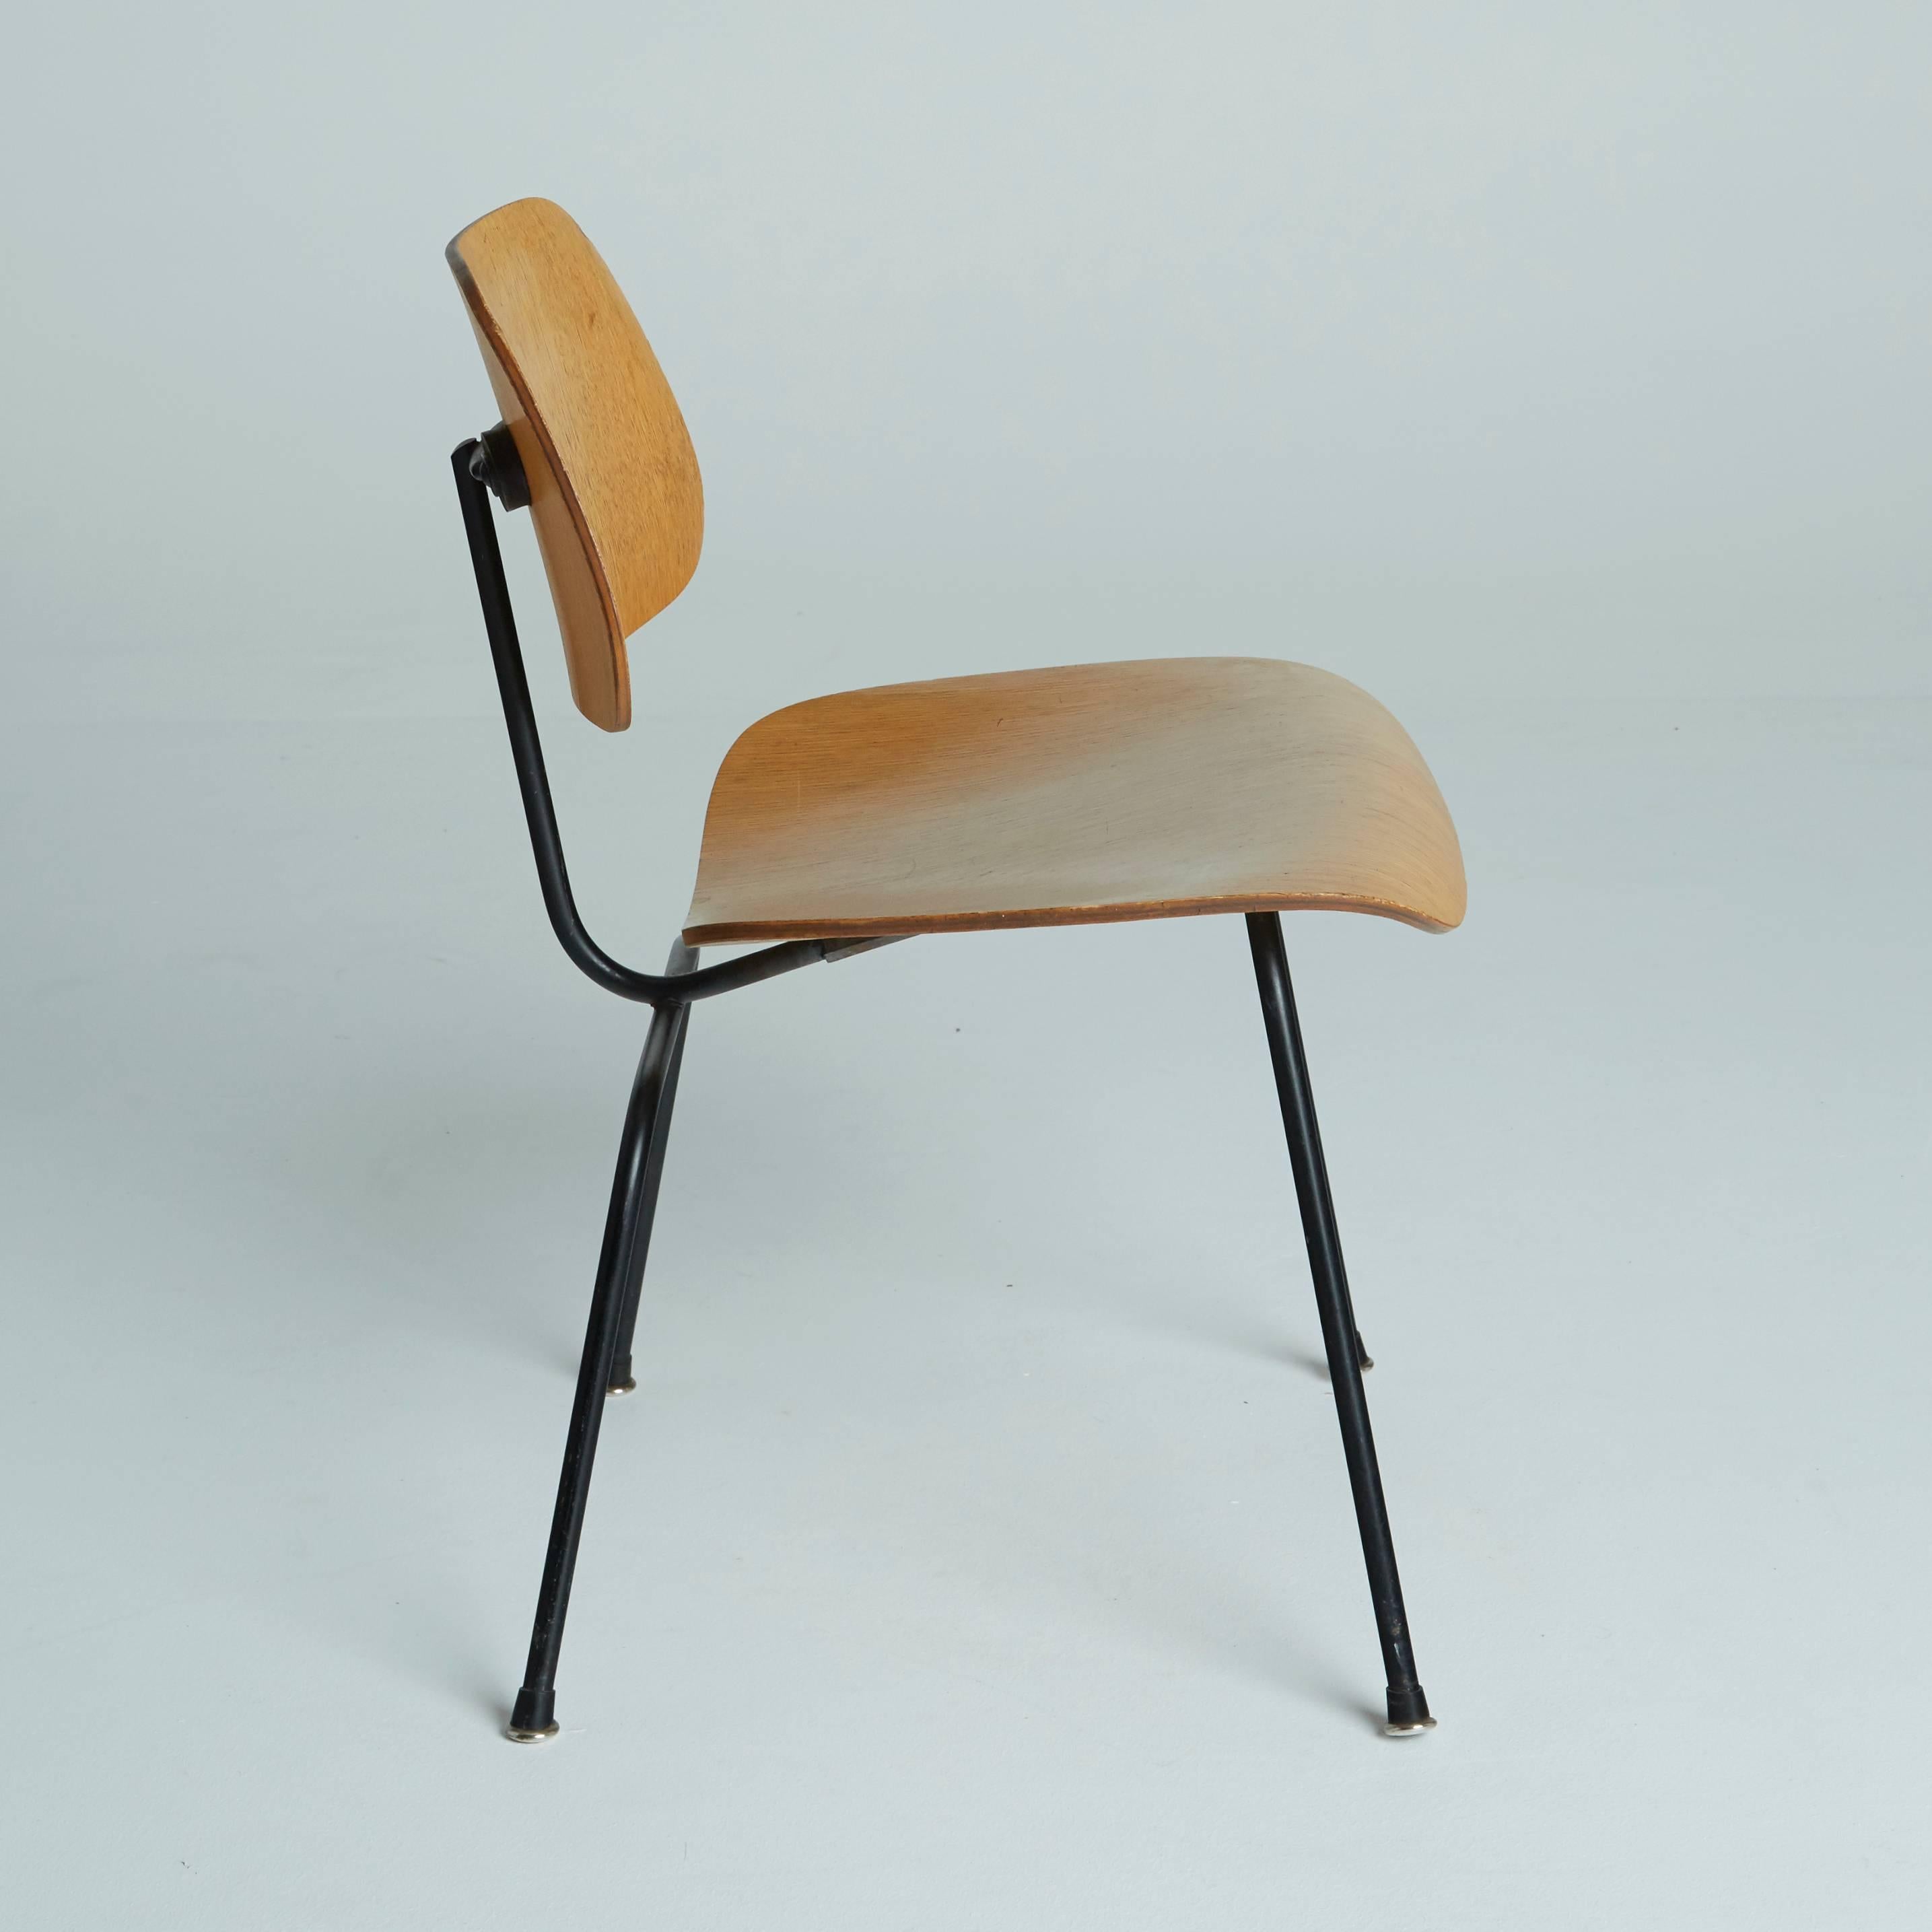 Molded DCM Chairs by Charles Eames for Herman Miller, circa 1950